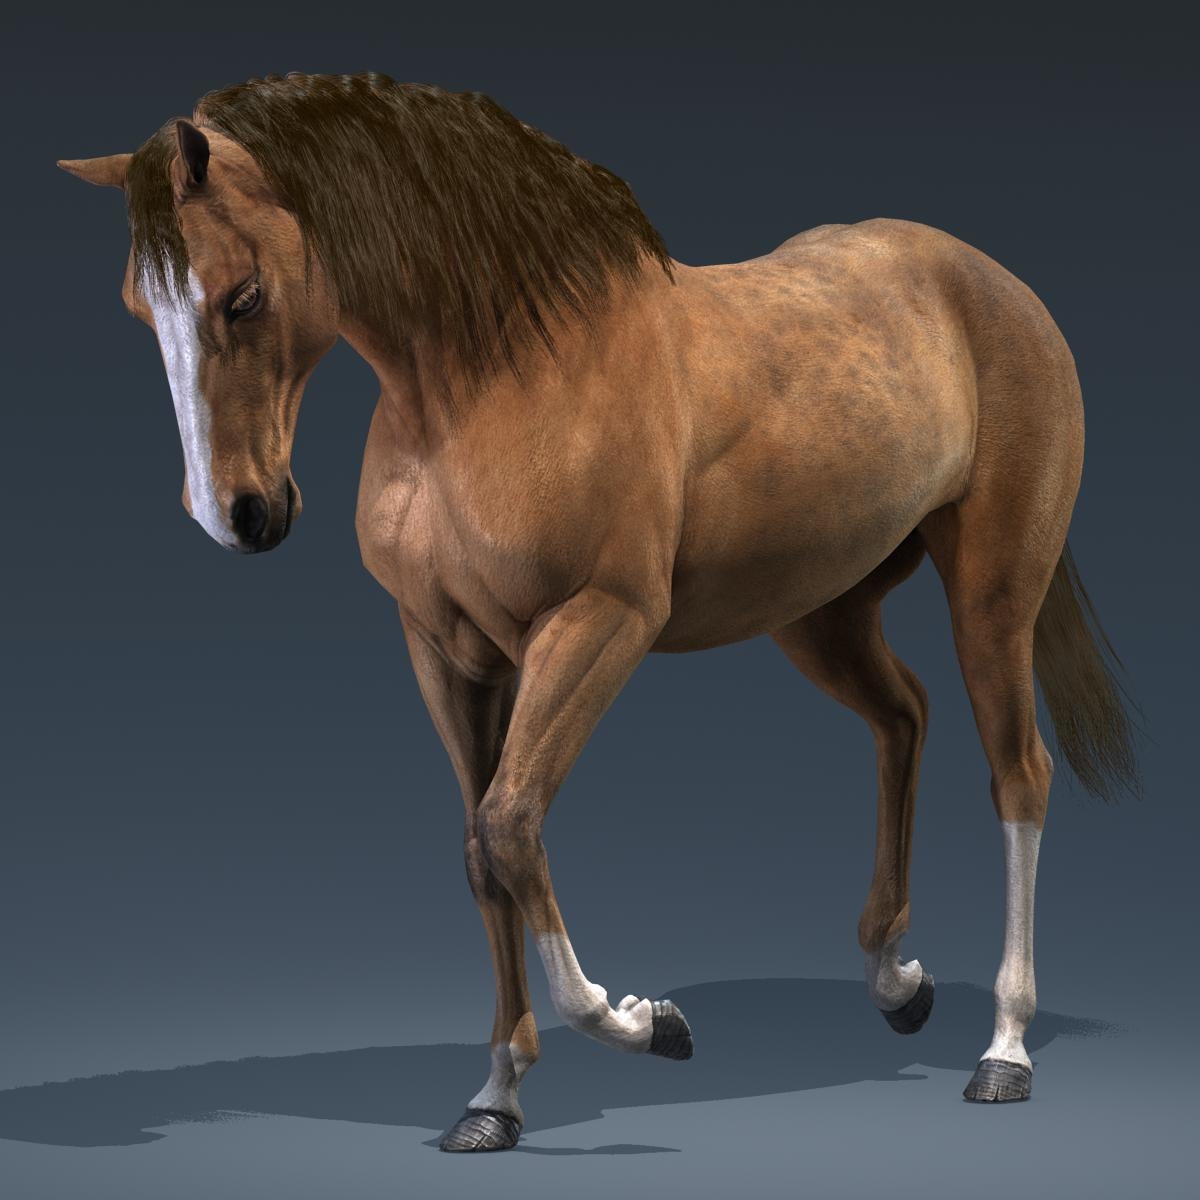 download 3d horse model in photoshop